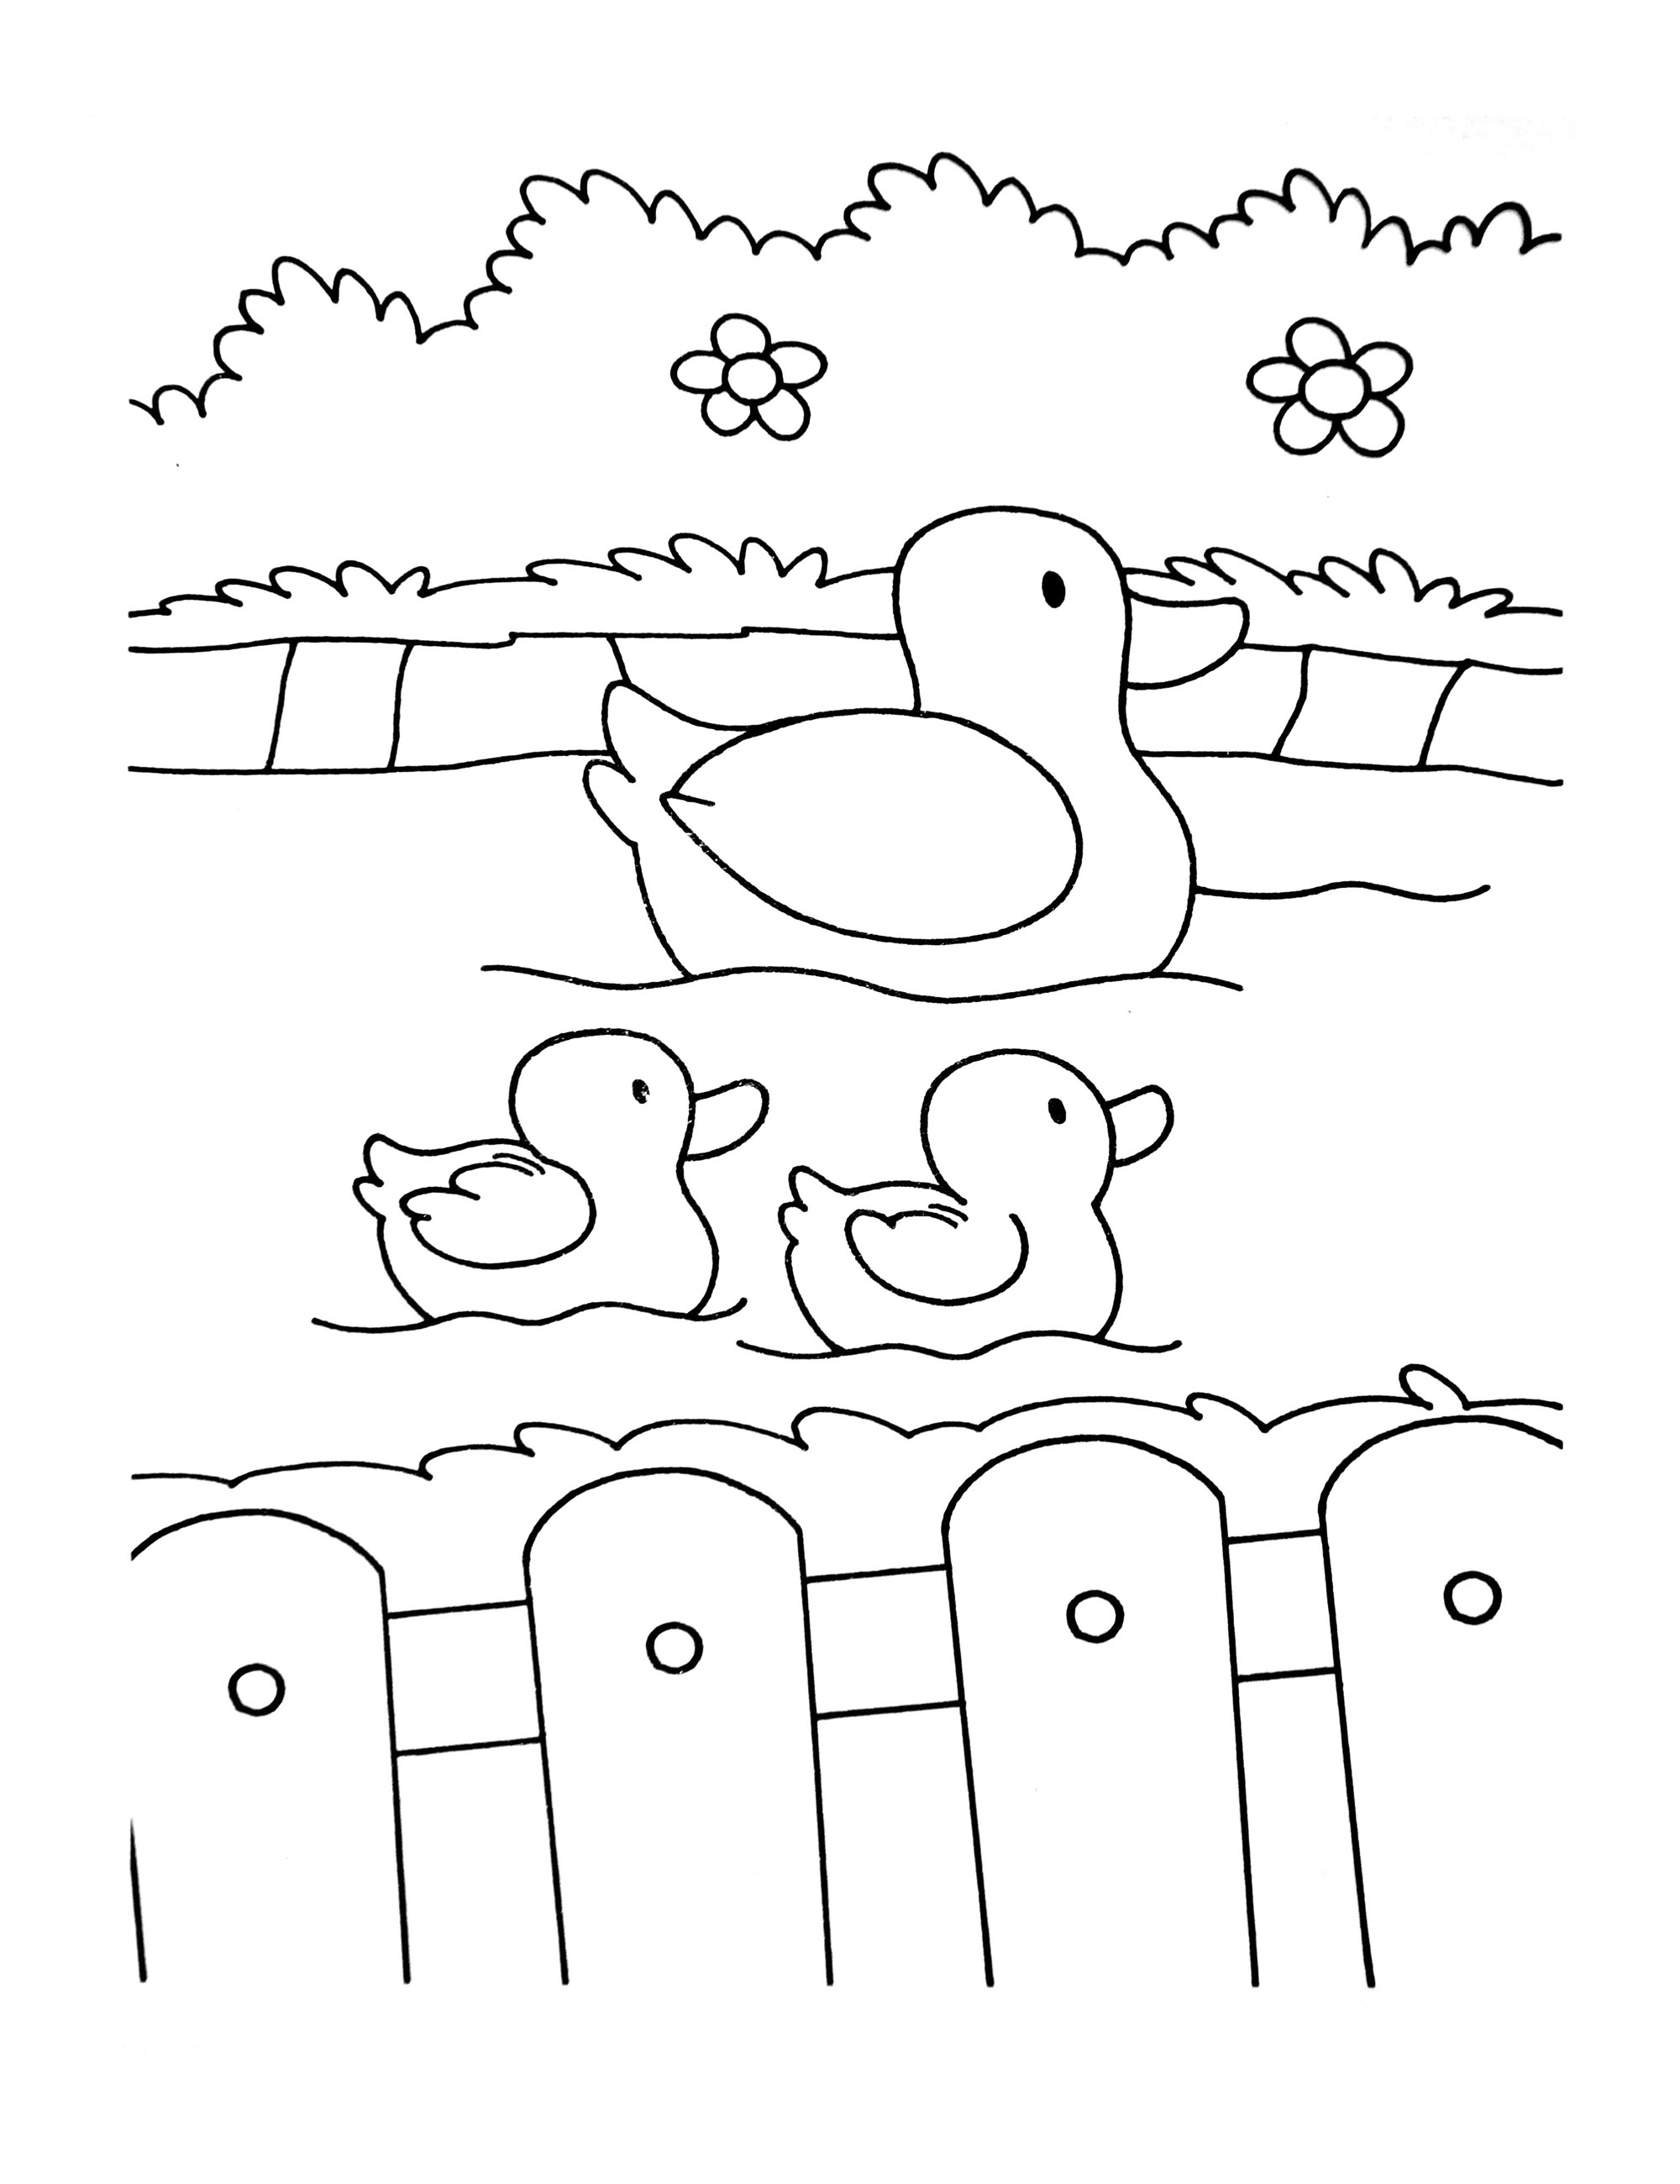 Farm image to color, easy for kids